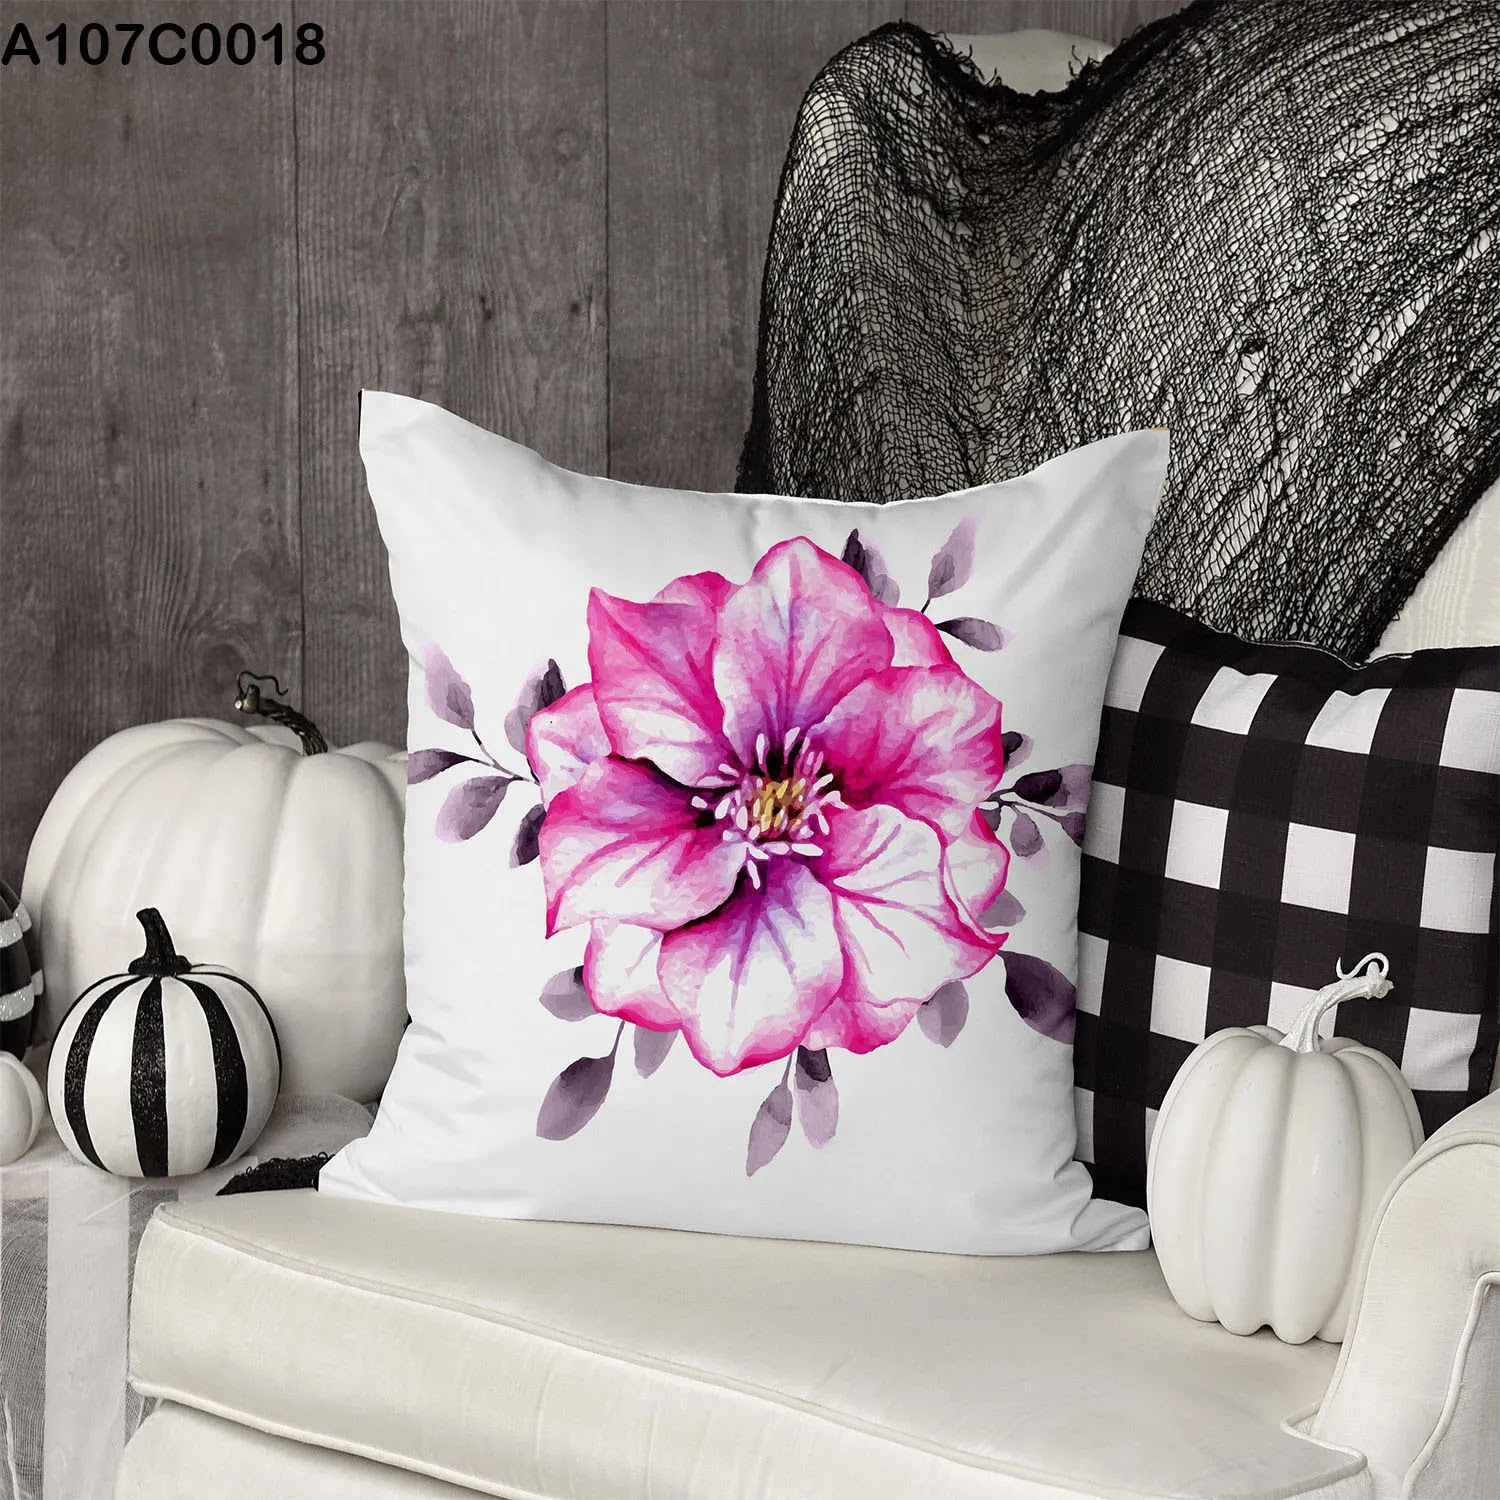 White pillow case with big pink flower